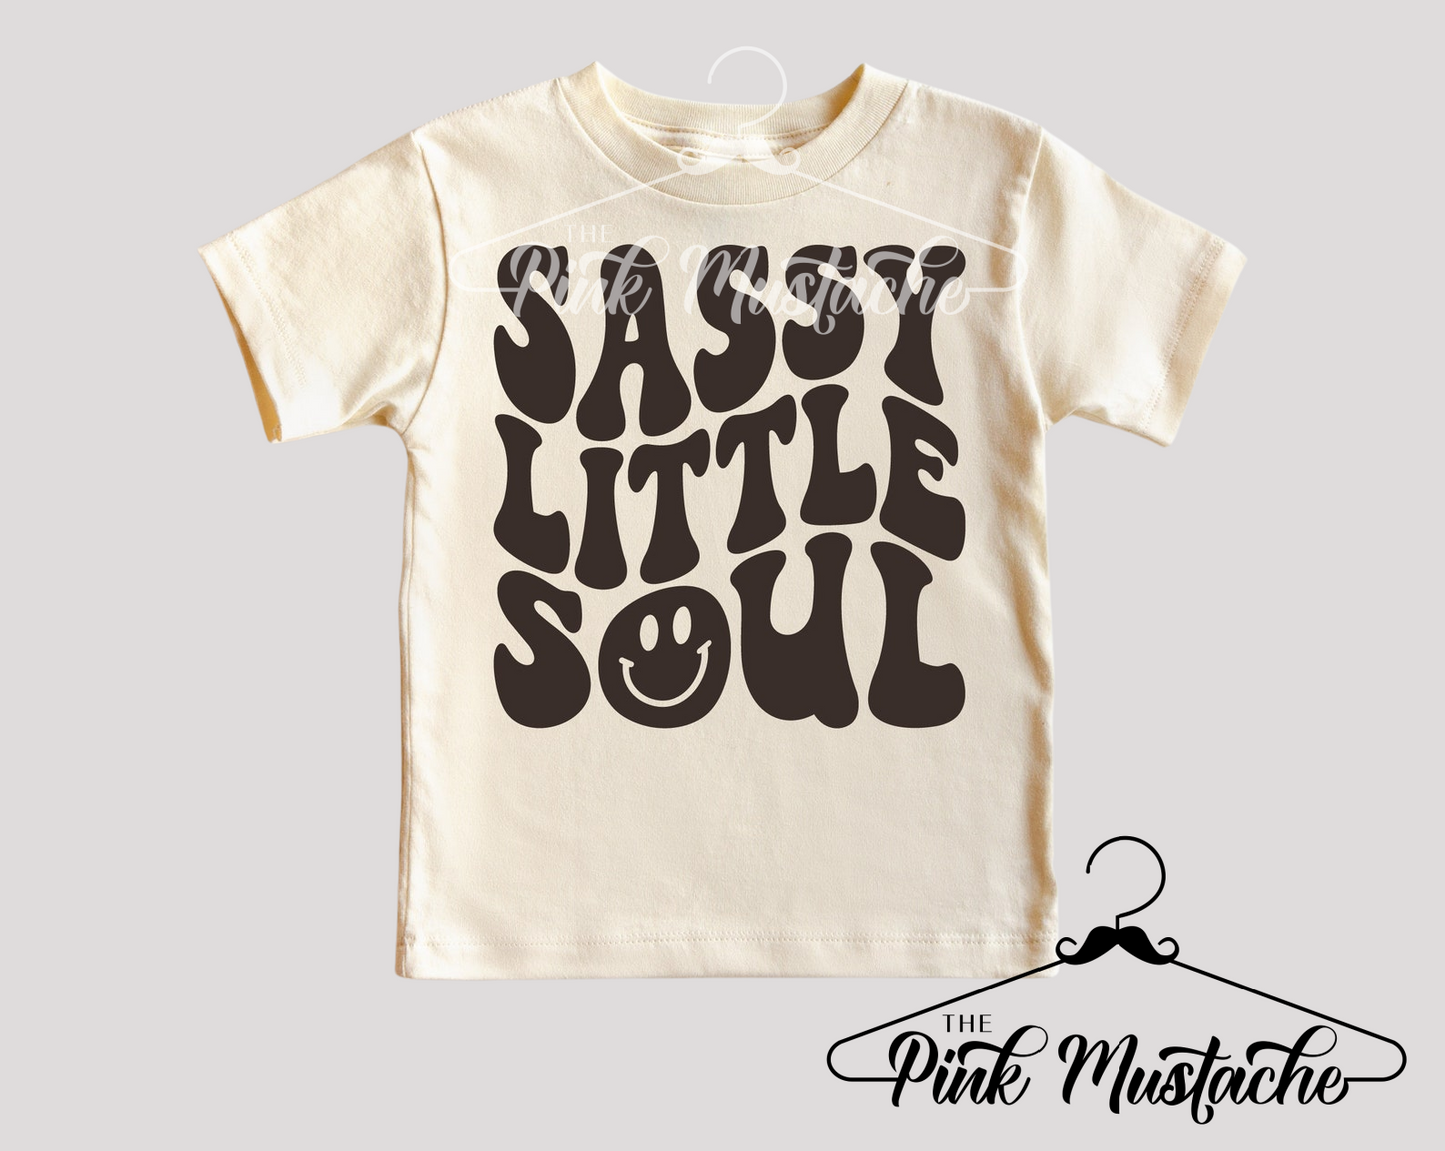 Toddler/ Youth Tee - Sassy Little Soul / Softstyle Tee